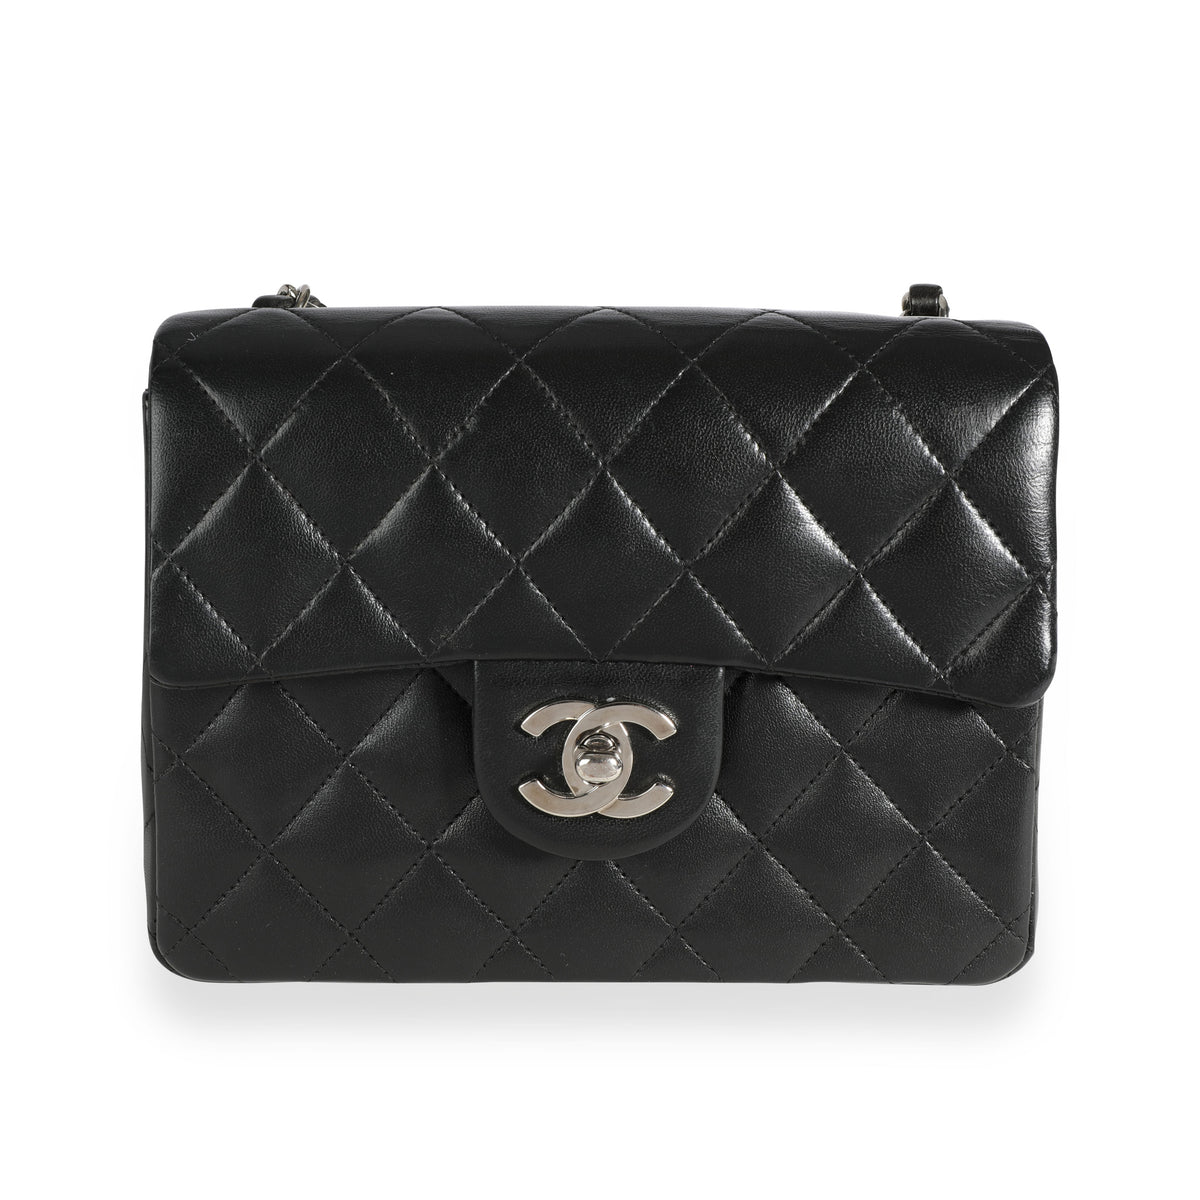 Chanel Vintage Brown Quilted Lambskin Classic Mini Square Flap Bag, myGemma